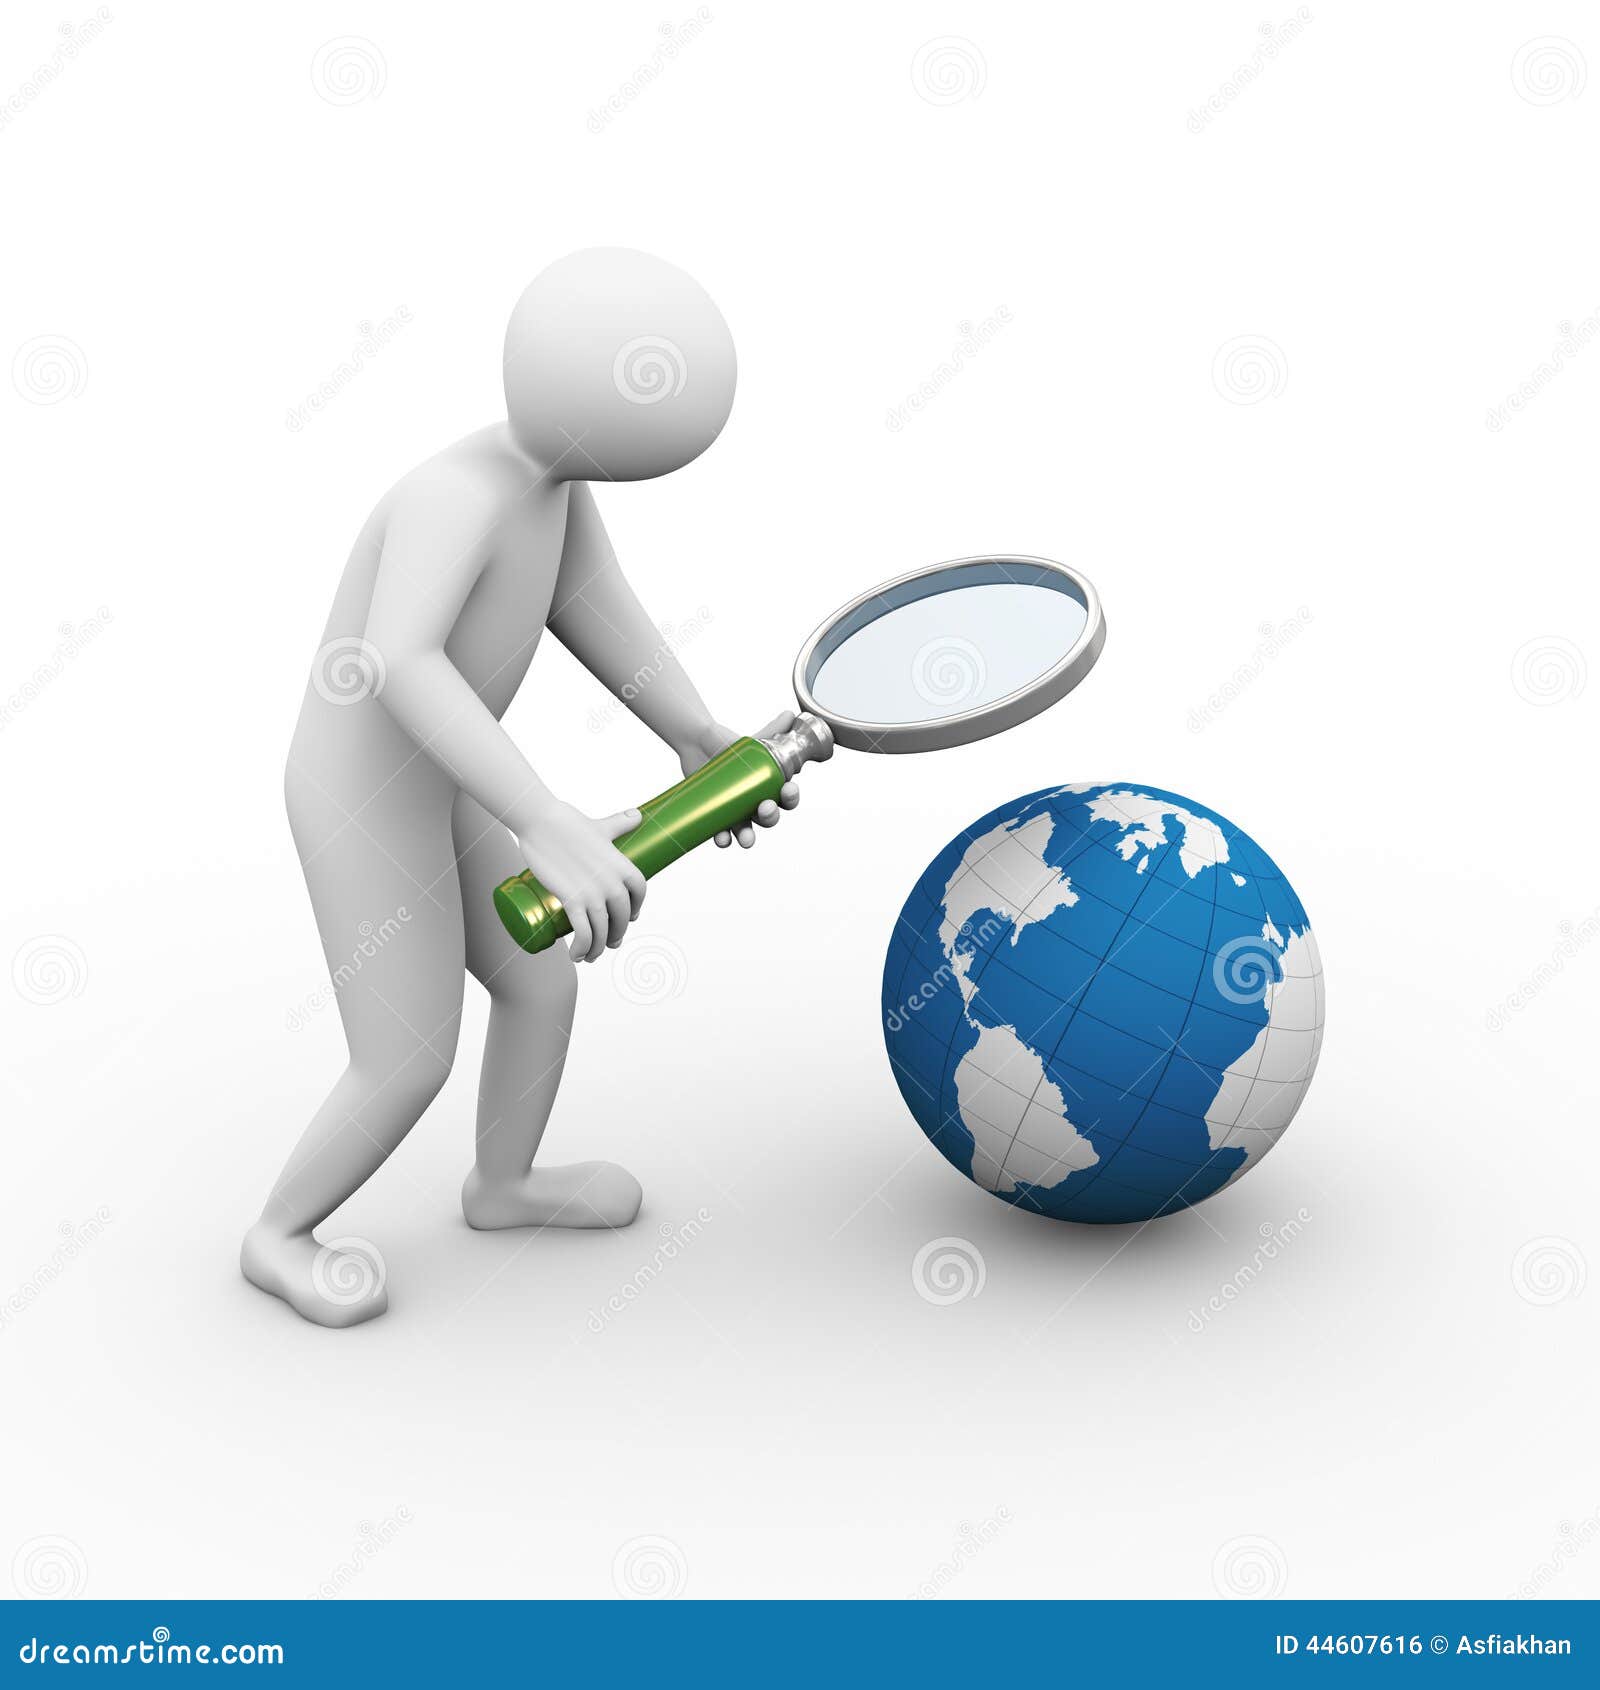 clipart man with magnifying glass - photo #44